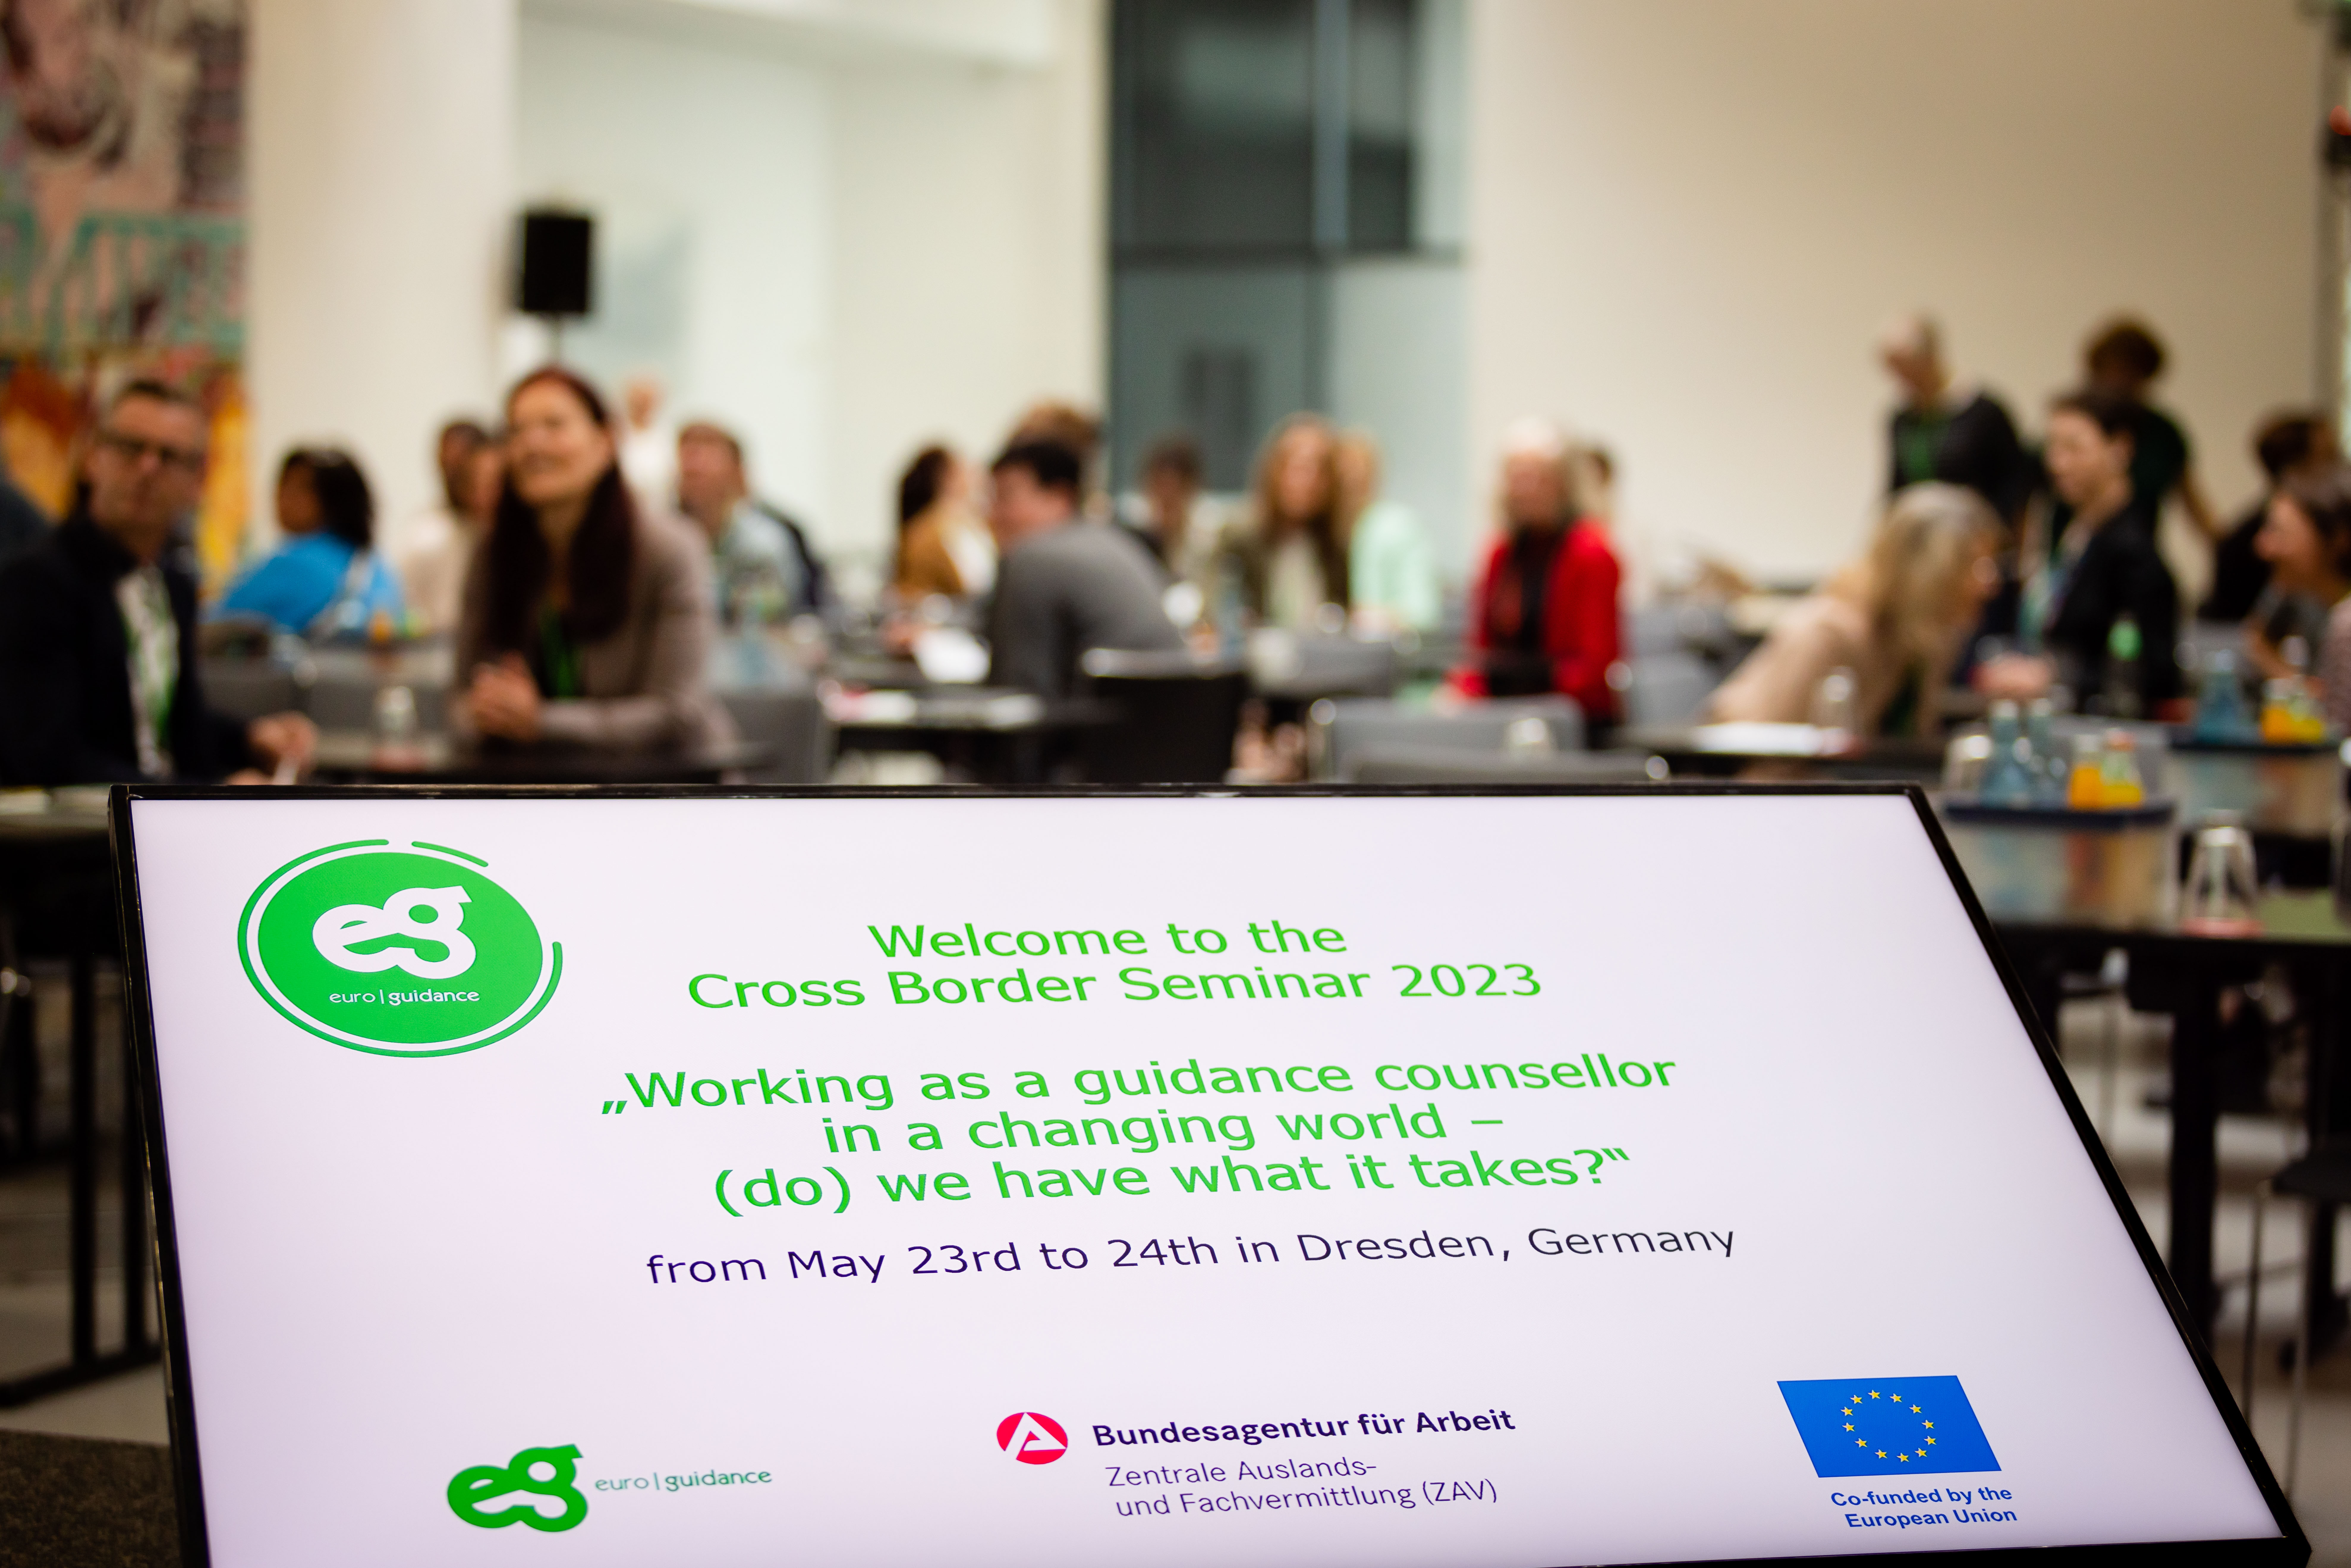 The topic of the Cross Border Seminar 2023 was always present